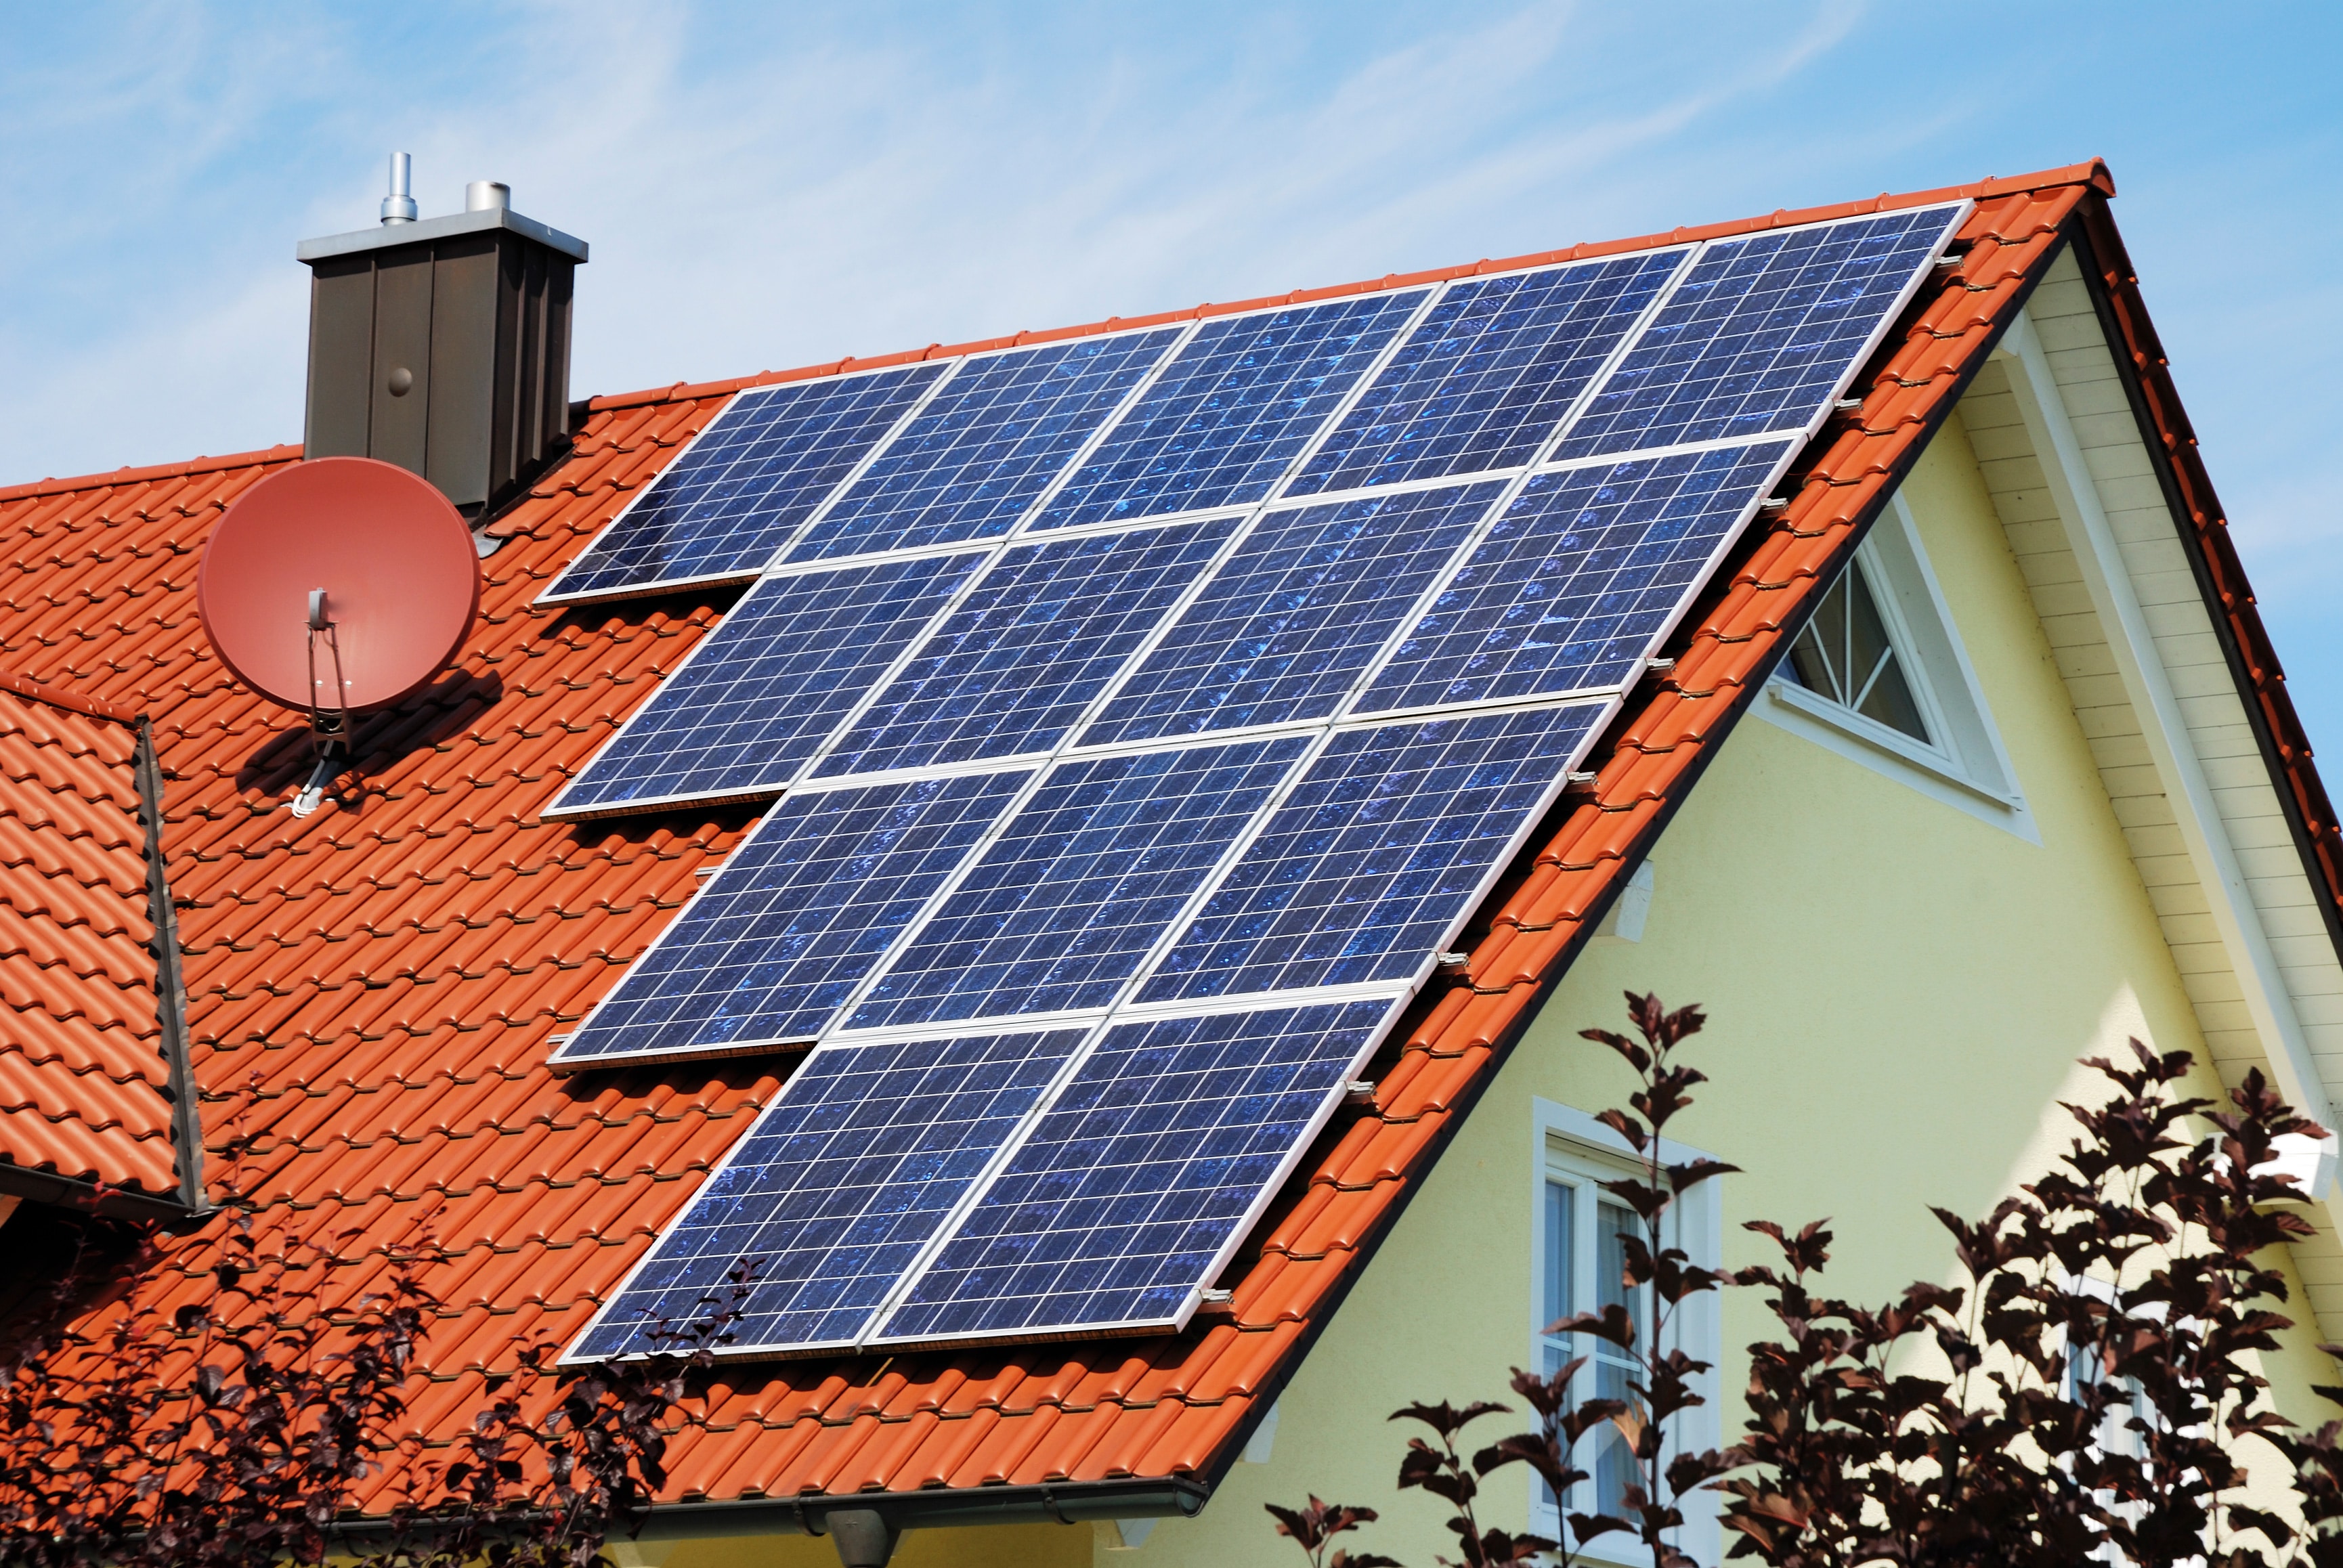 Incentives for investment in self-consumption rooftop solar power